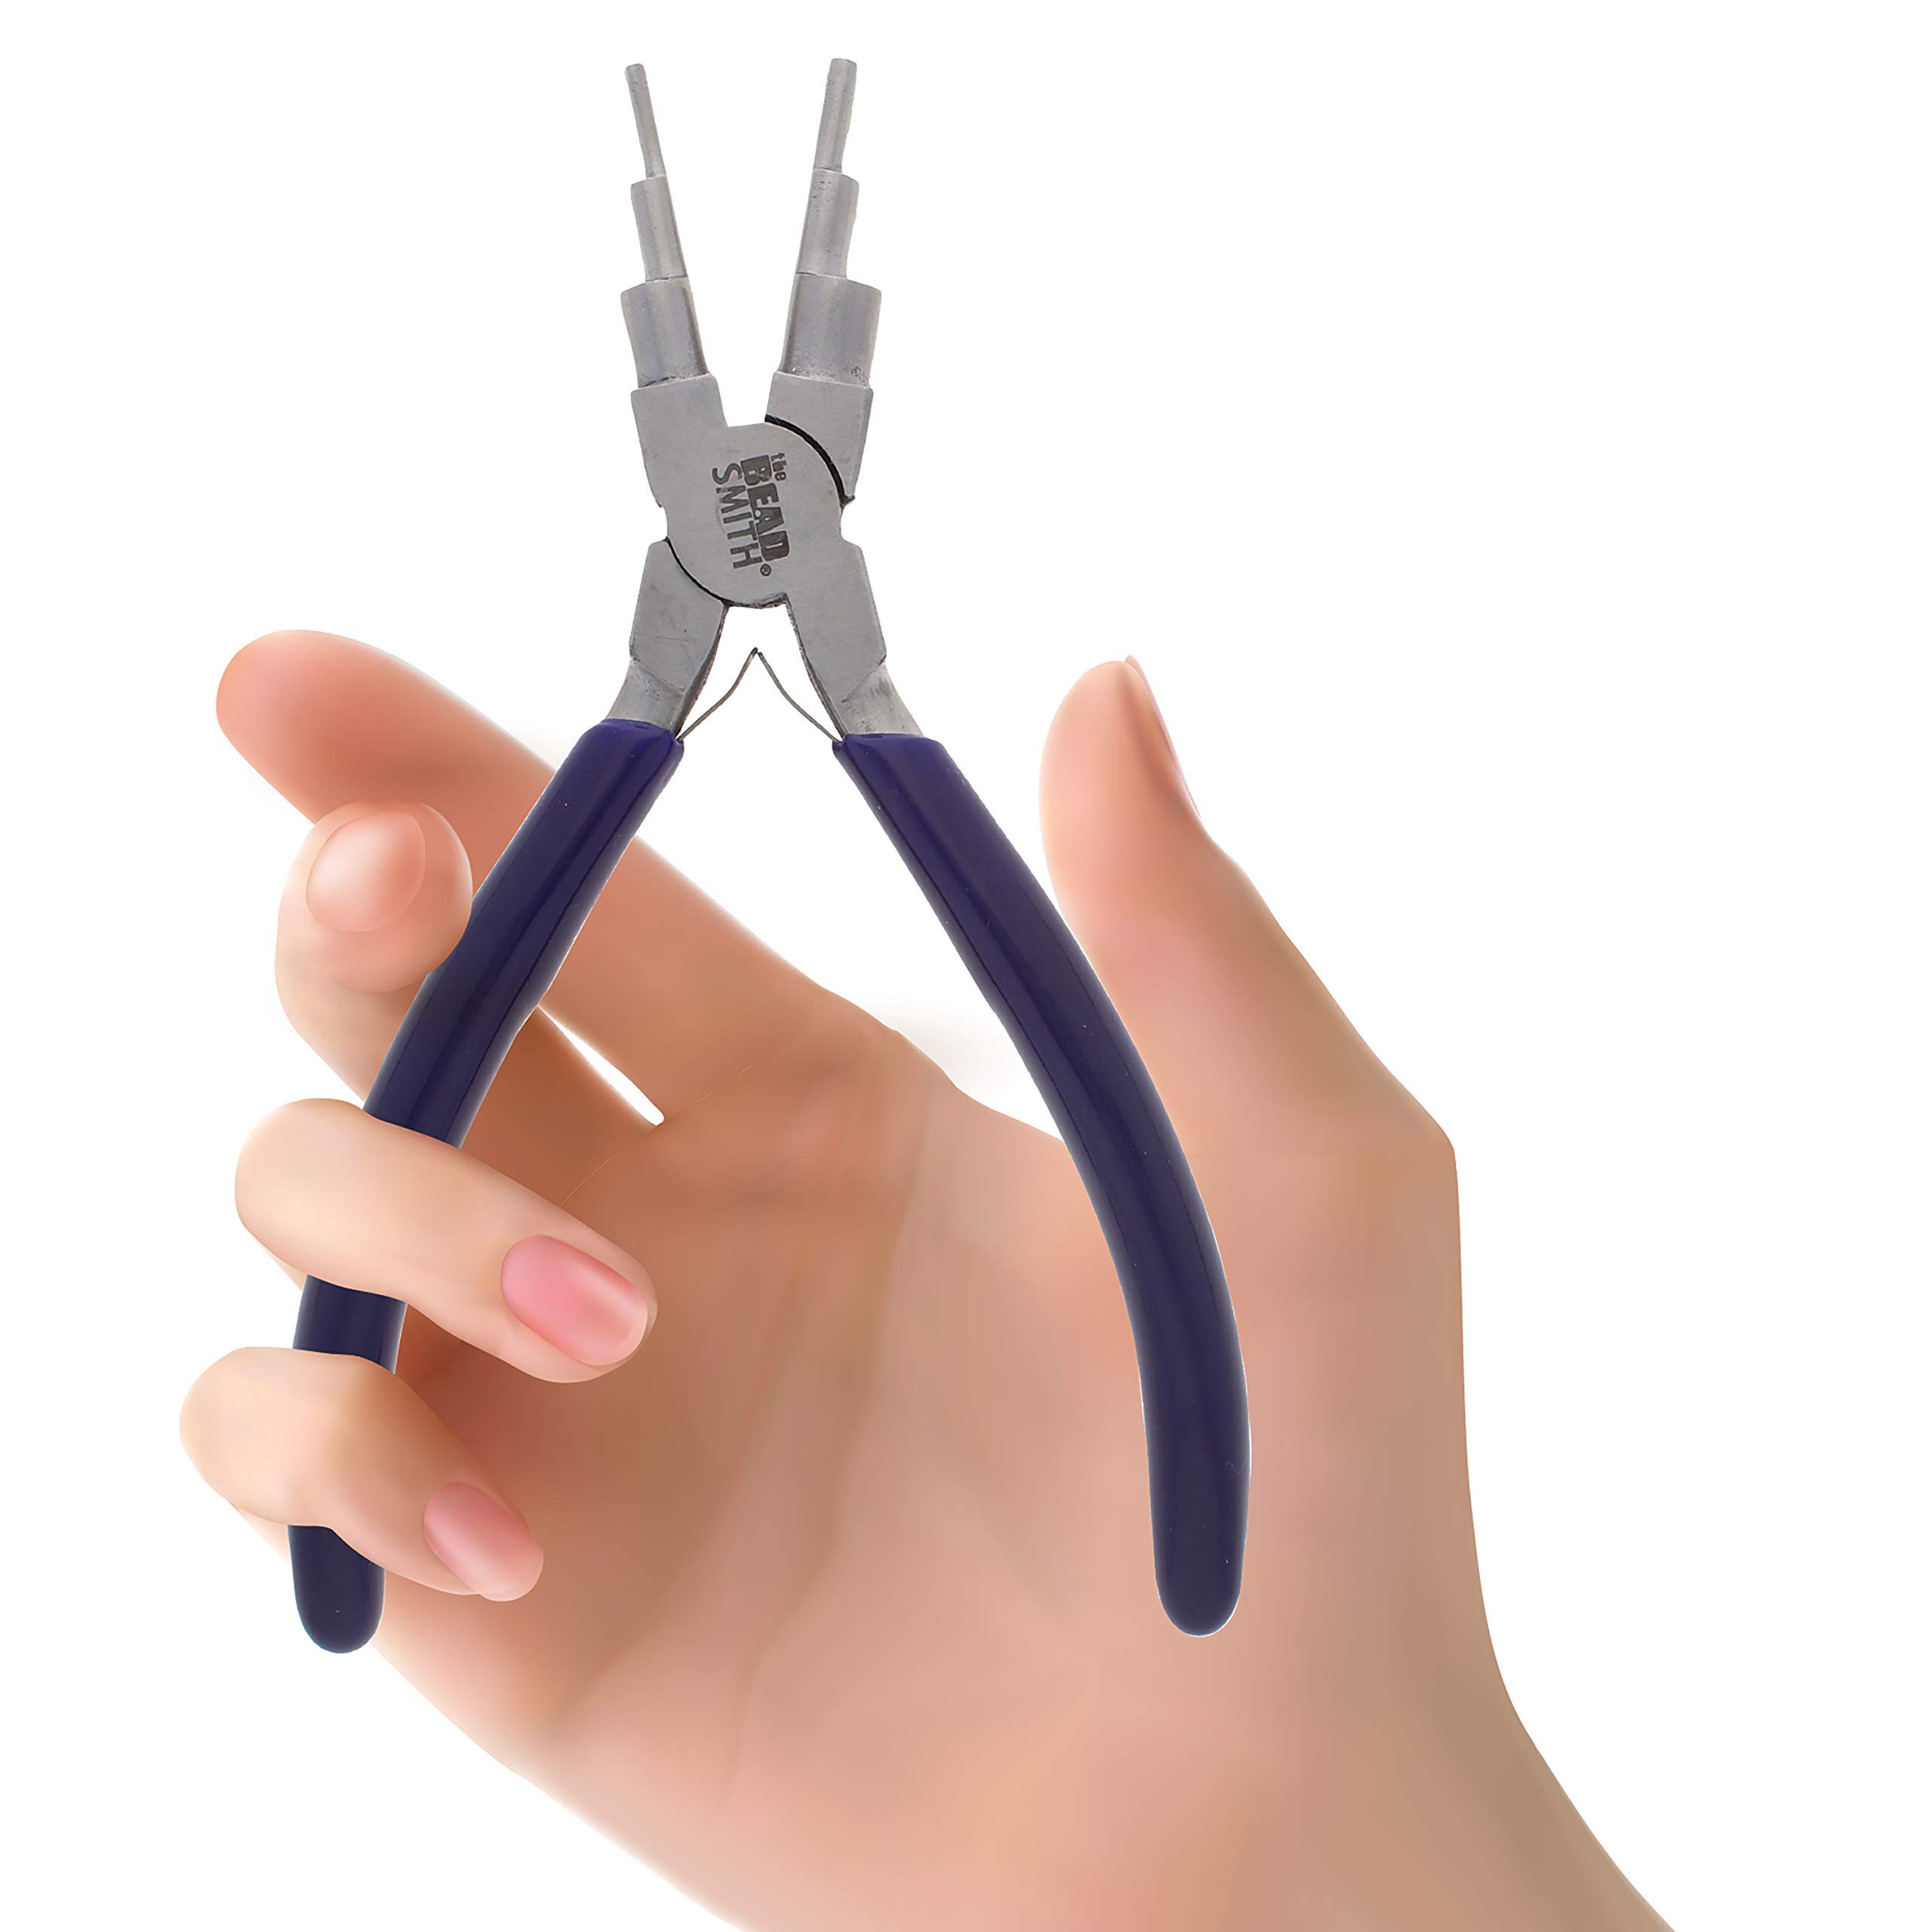 The Beadsmith Wire Bending Pliers - Consistently make up to 6 size loops & jump rings, 2-9mm - 5.75